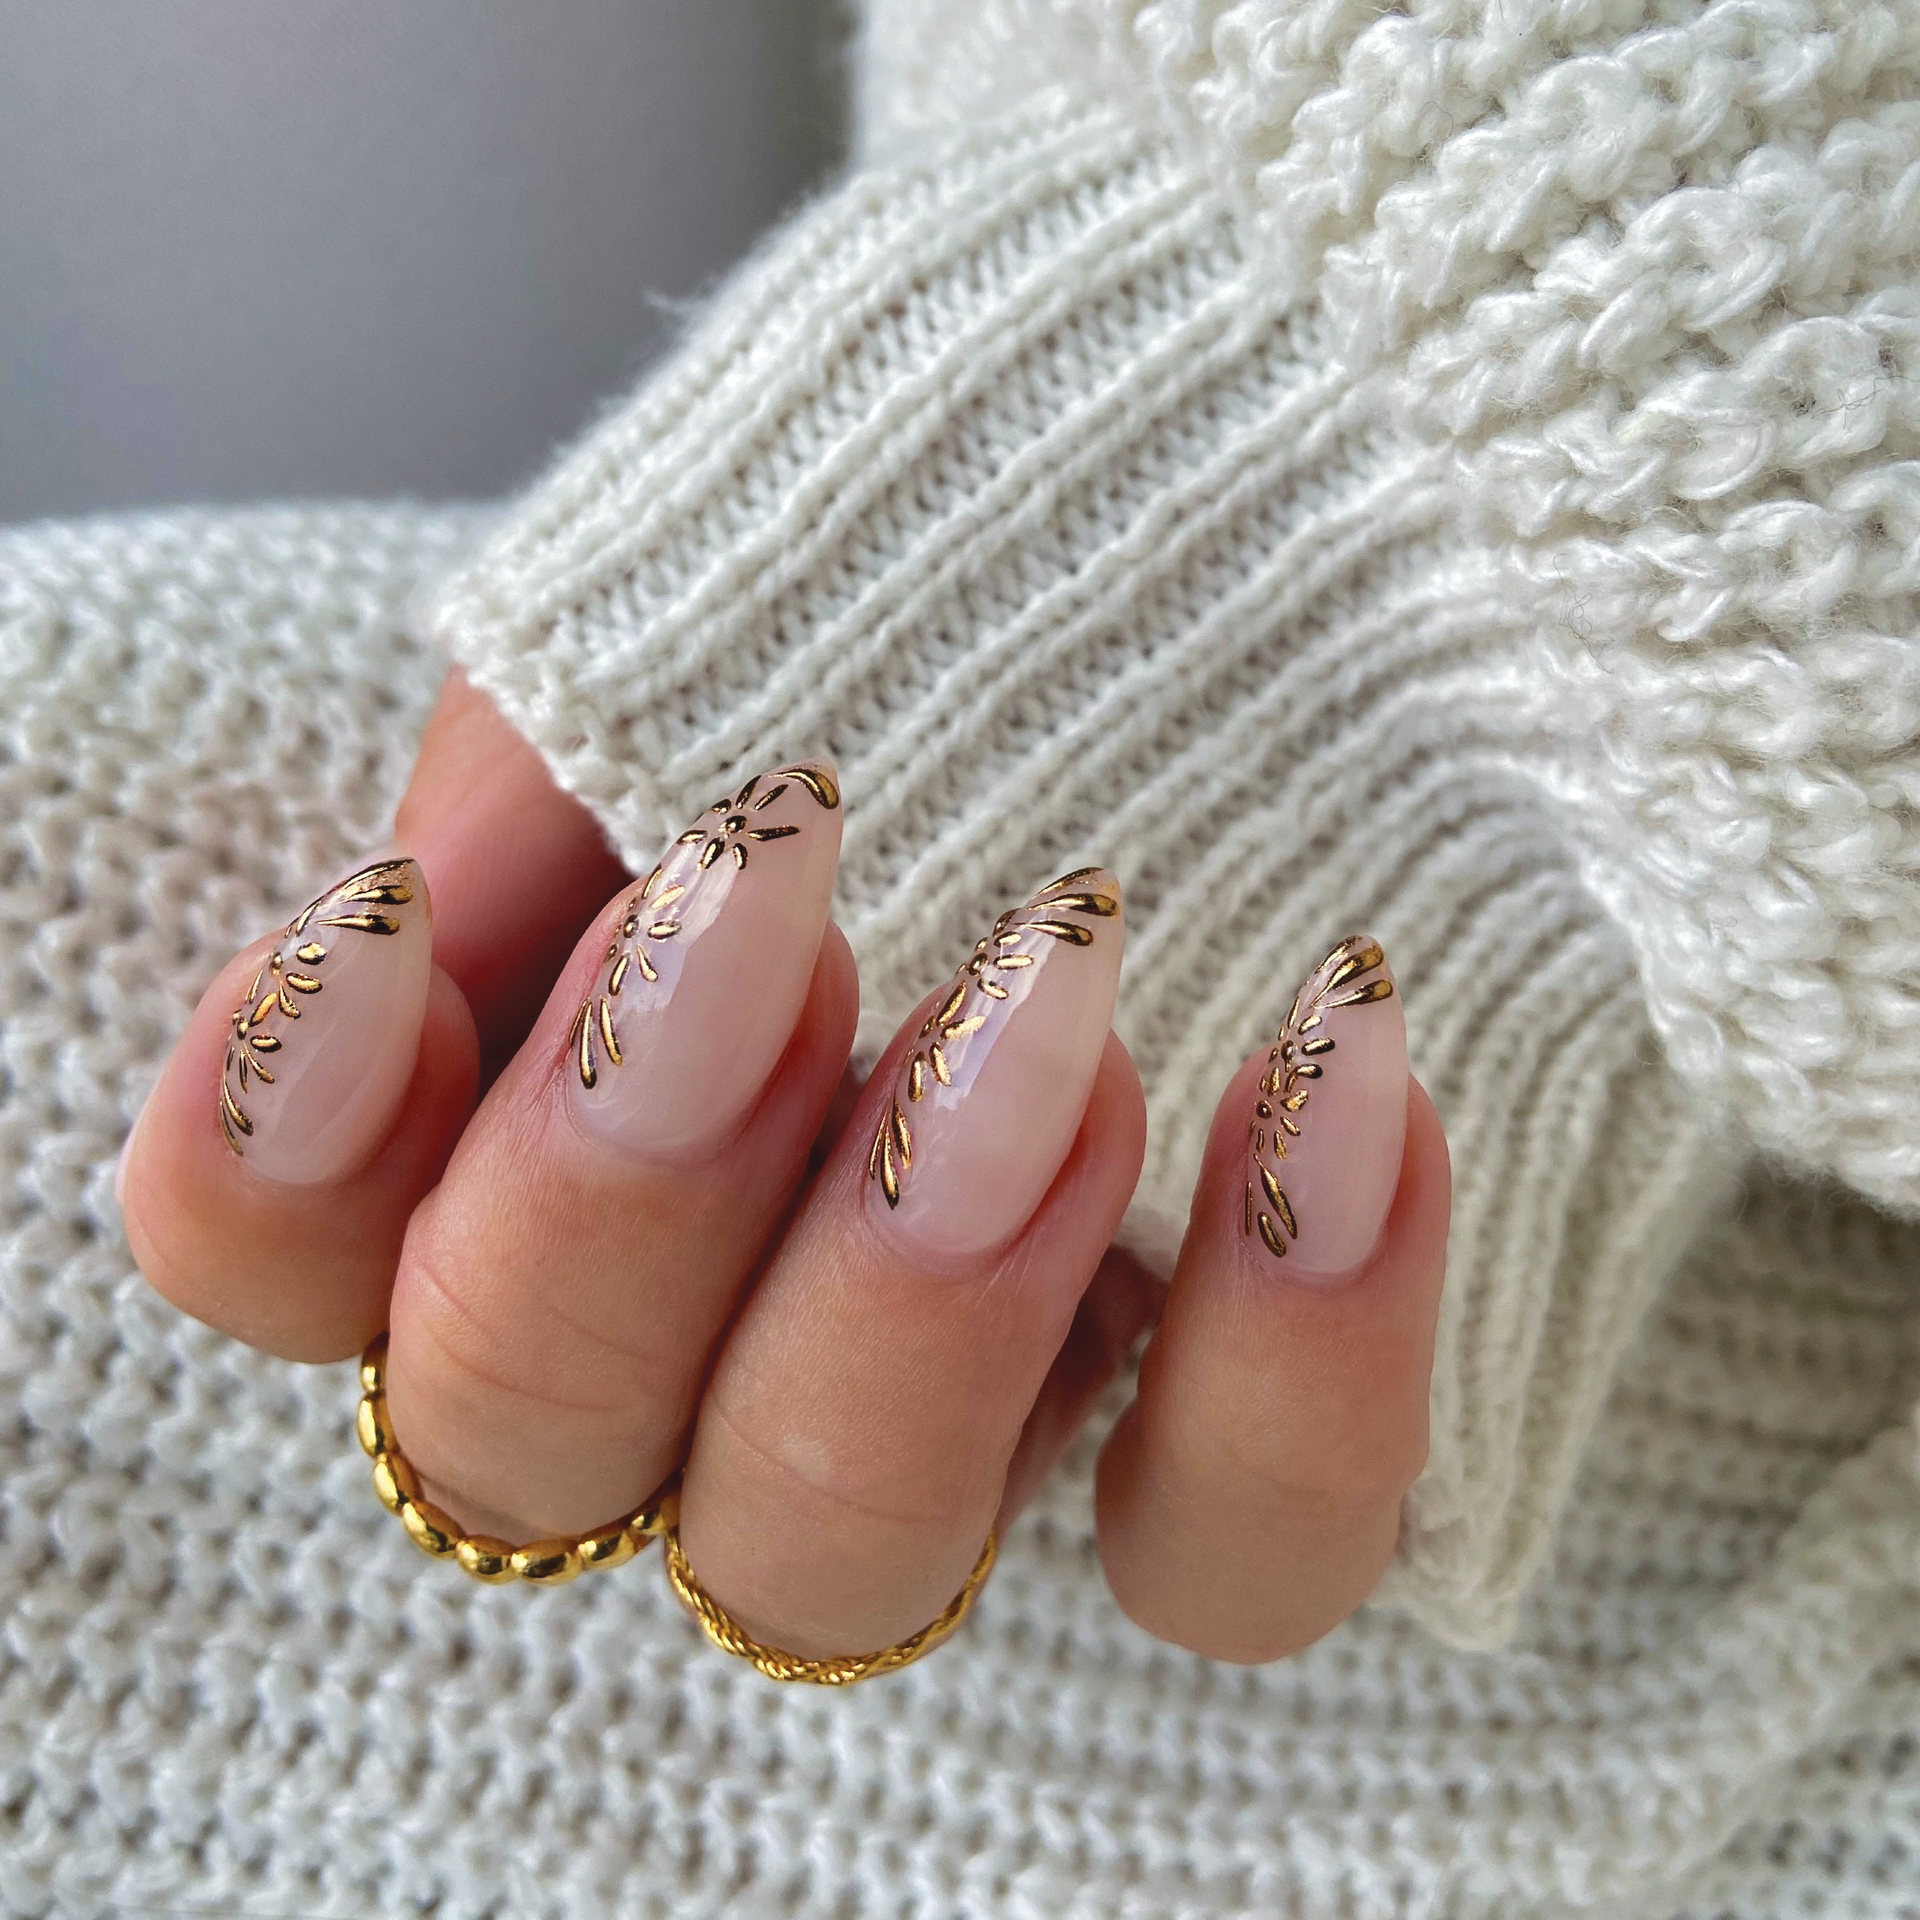 The Best Wedding Nail Designs and Nail Art for Brides